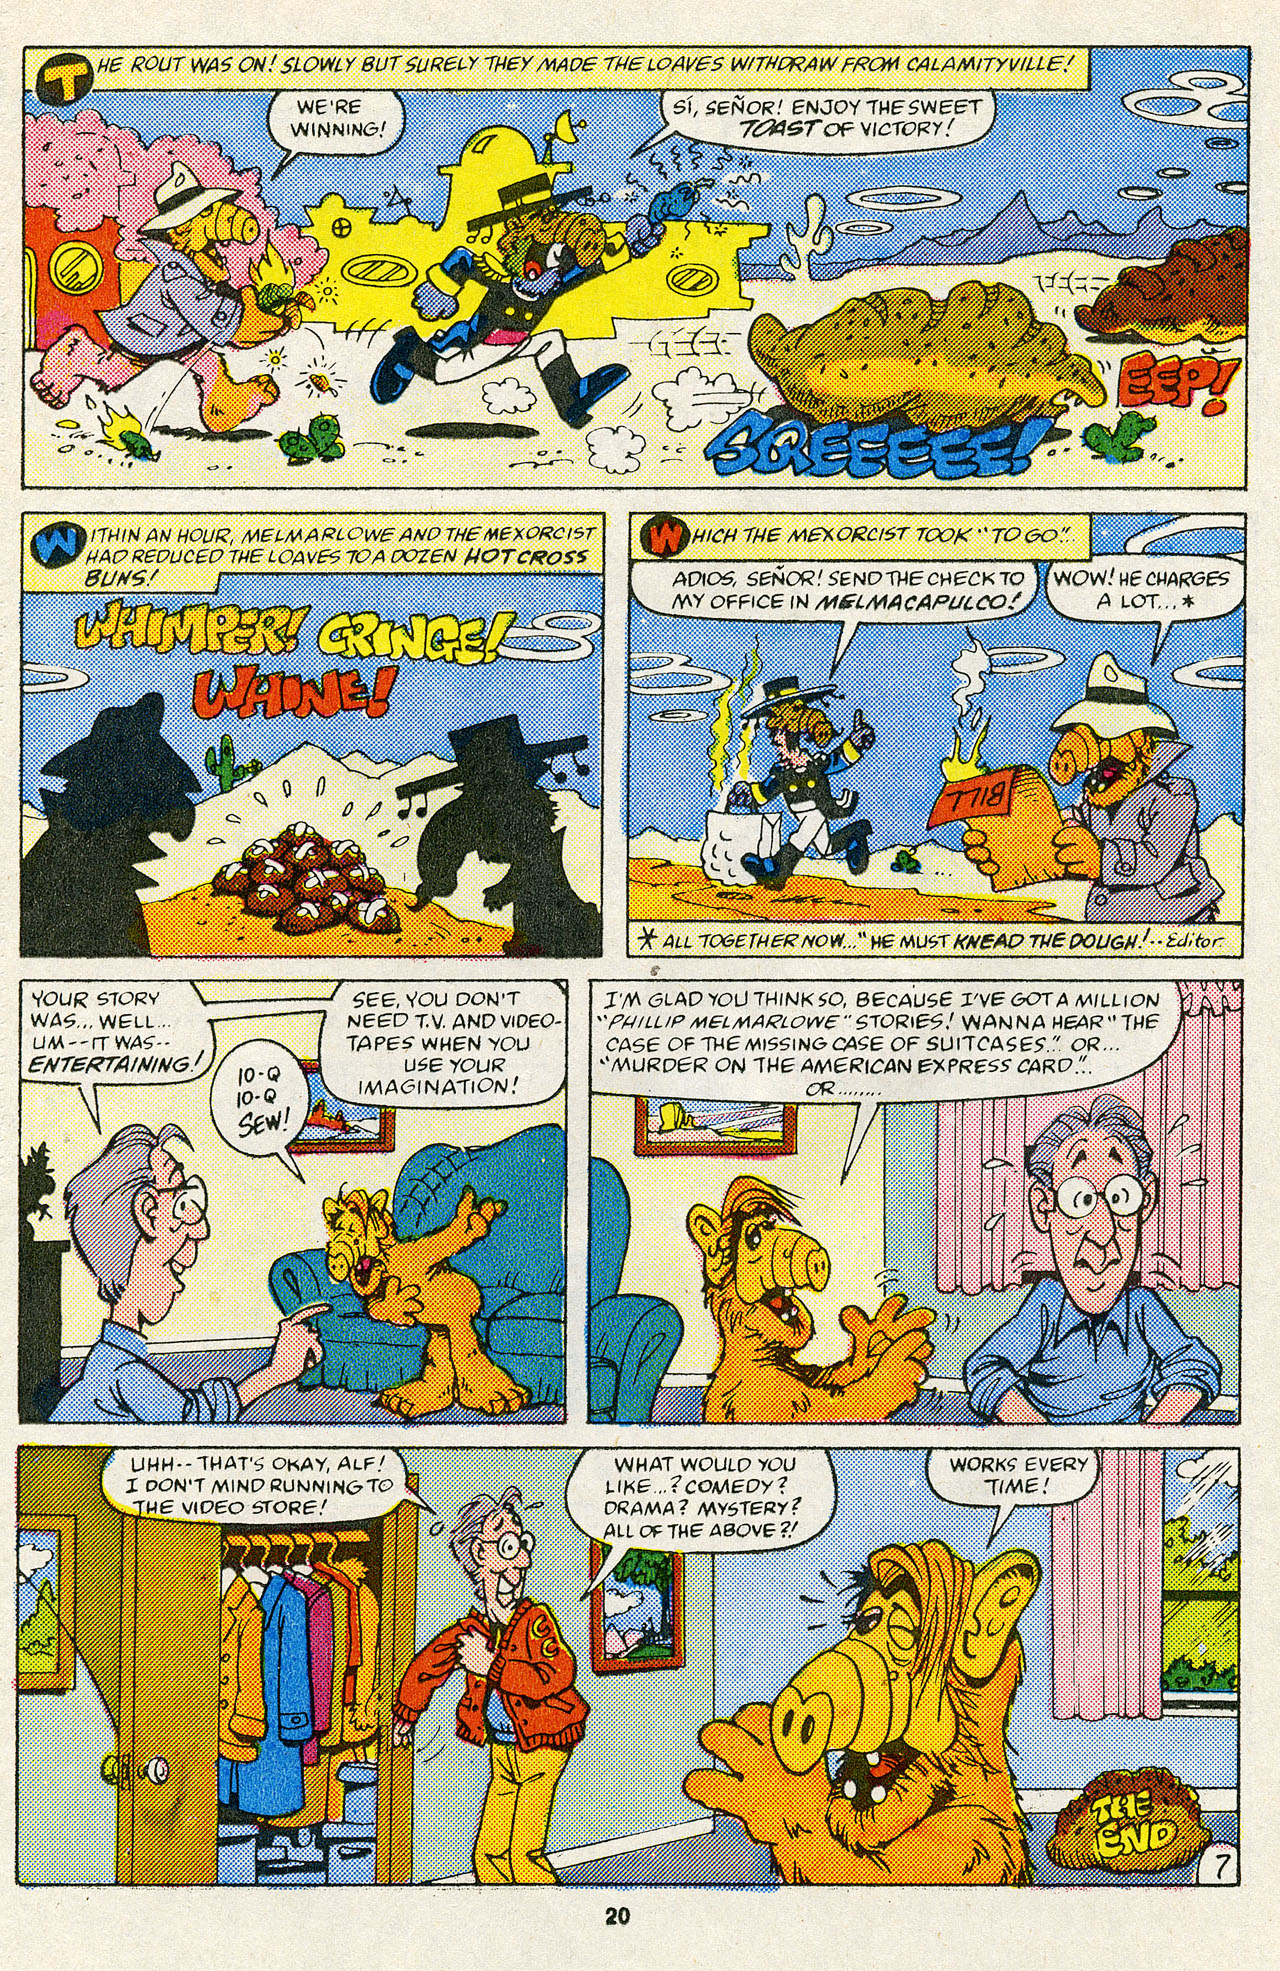 Alf Issue 14 | Read Alf Issue 14 comic online in high 